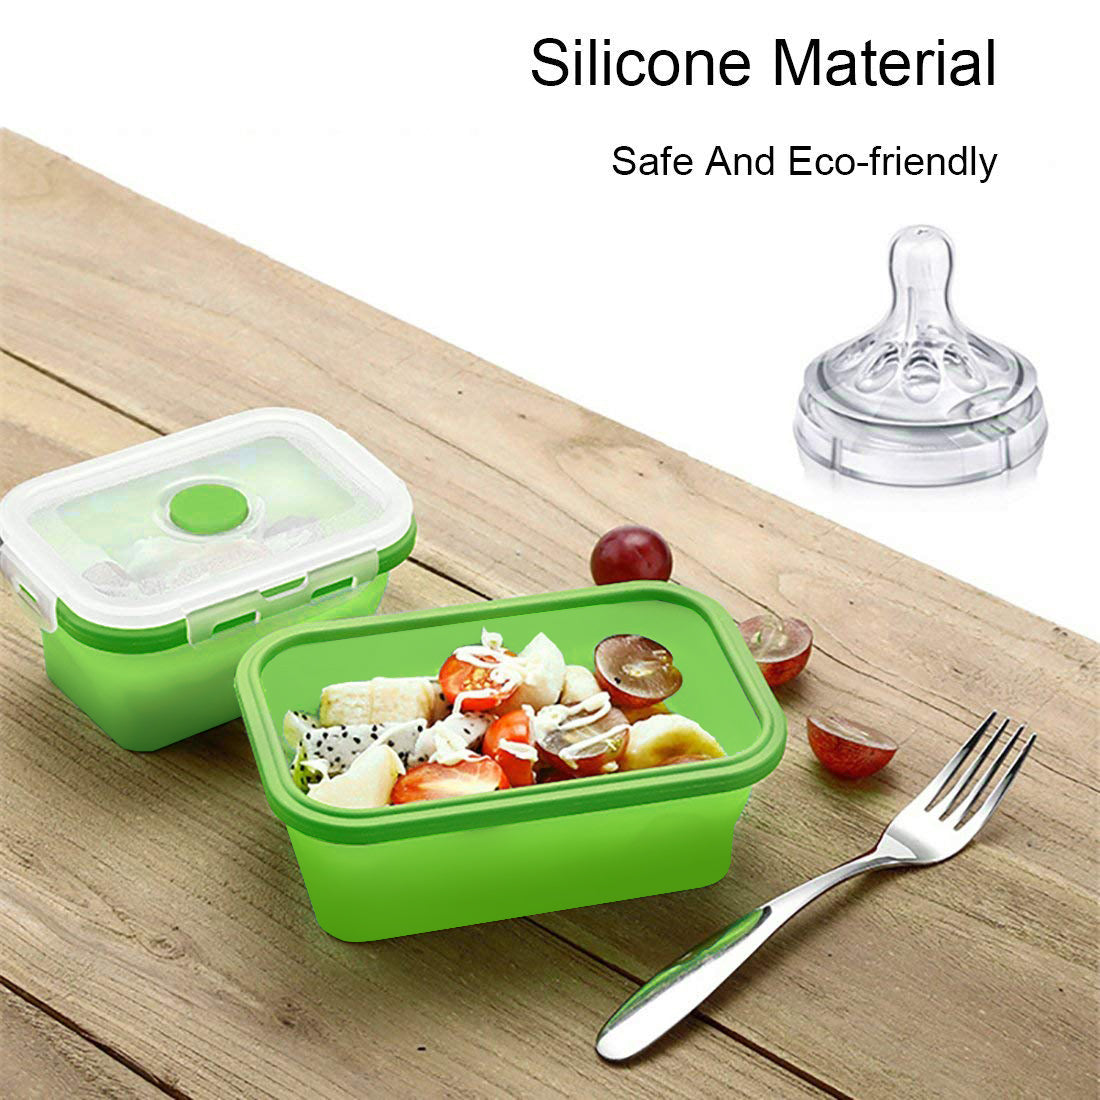 ionEgg Silicone Lunch Container with Spoon & Fork, Bento Box, Collapsible Food Storage Container with Clip-On Lid, 20 oz